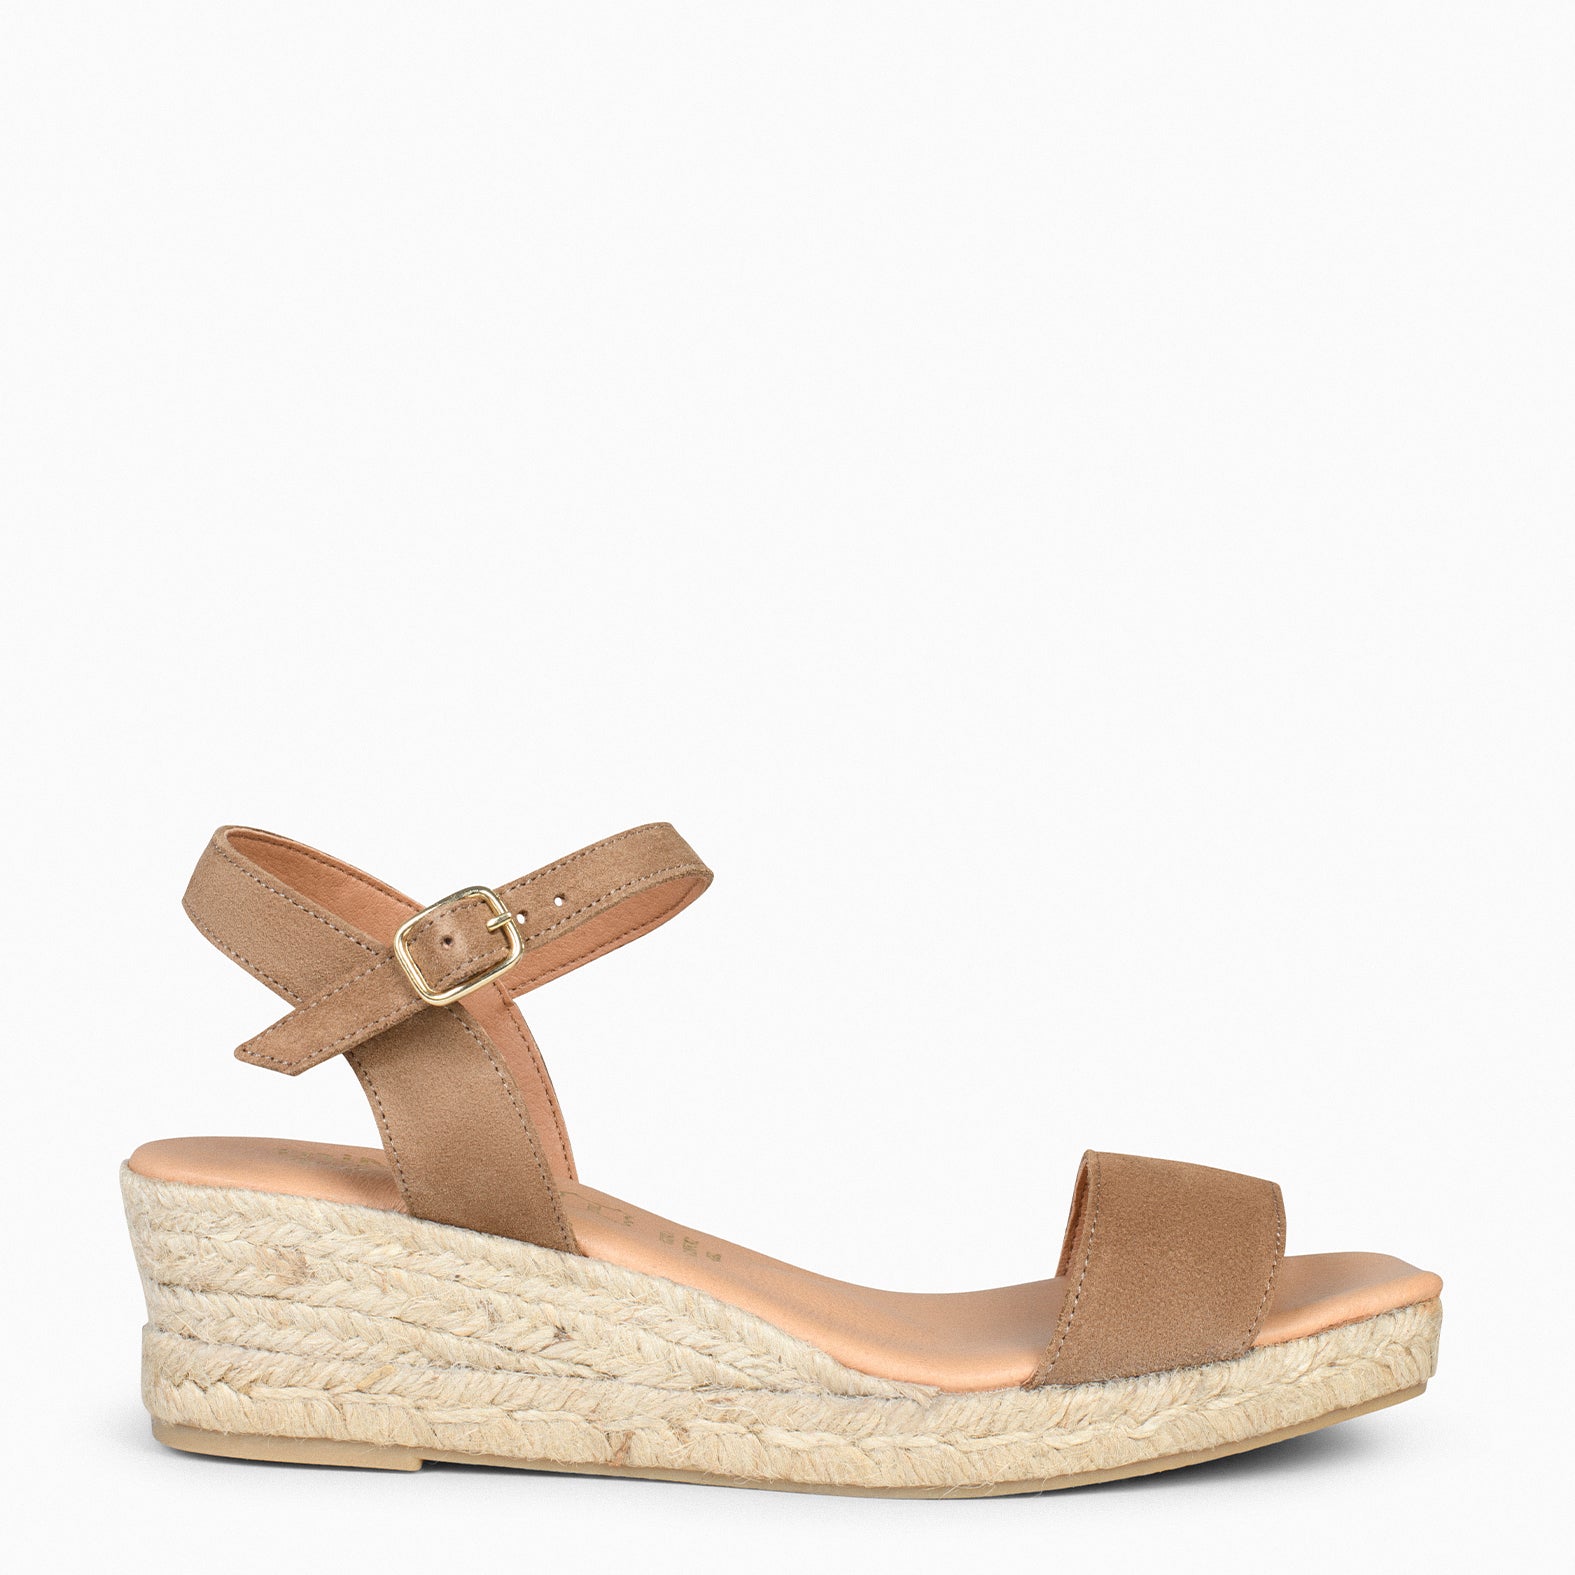 JEREZ – TAUPE espadrilles with comfortable wedge